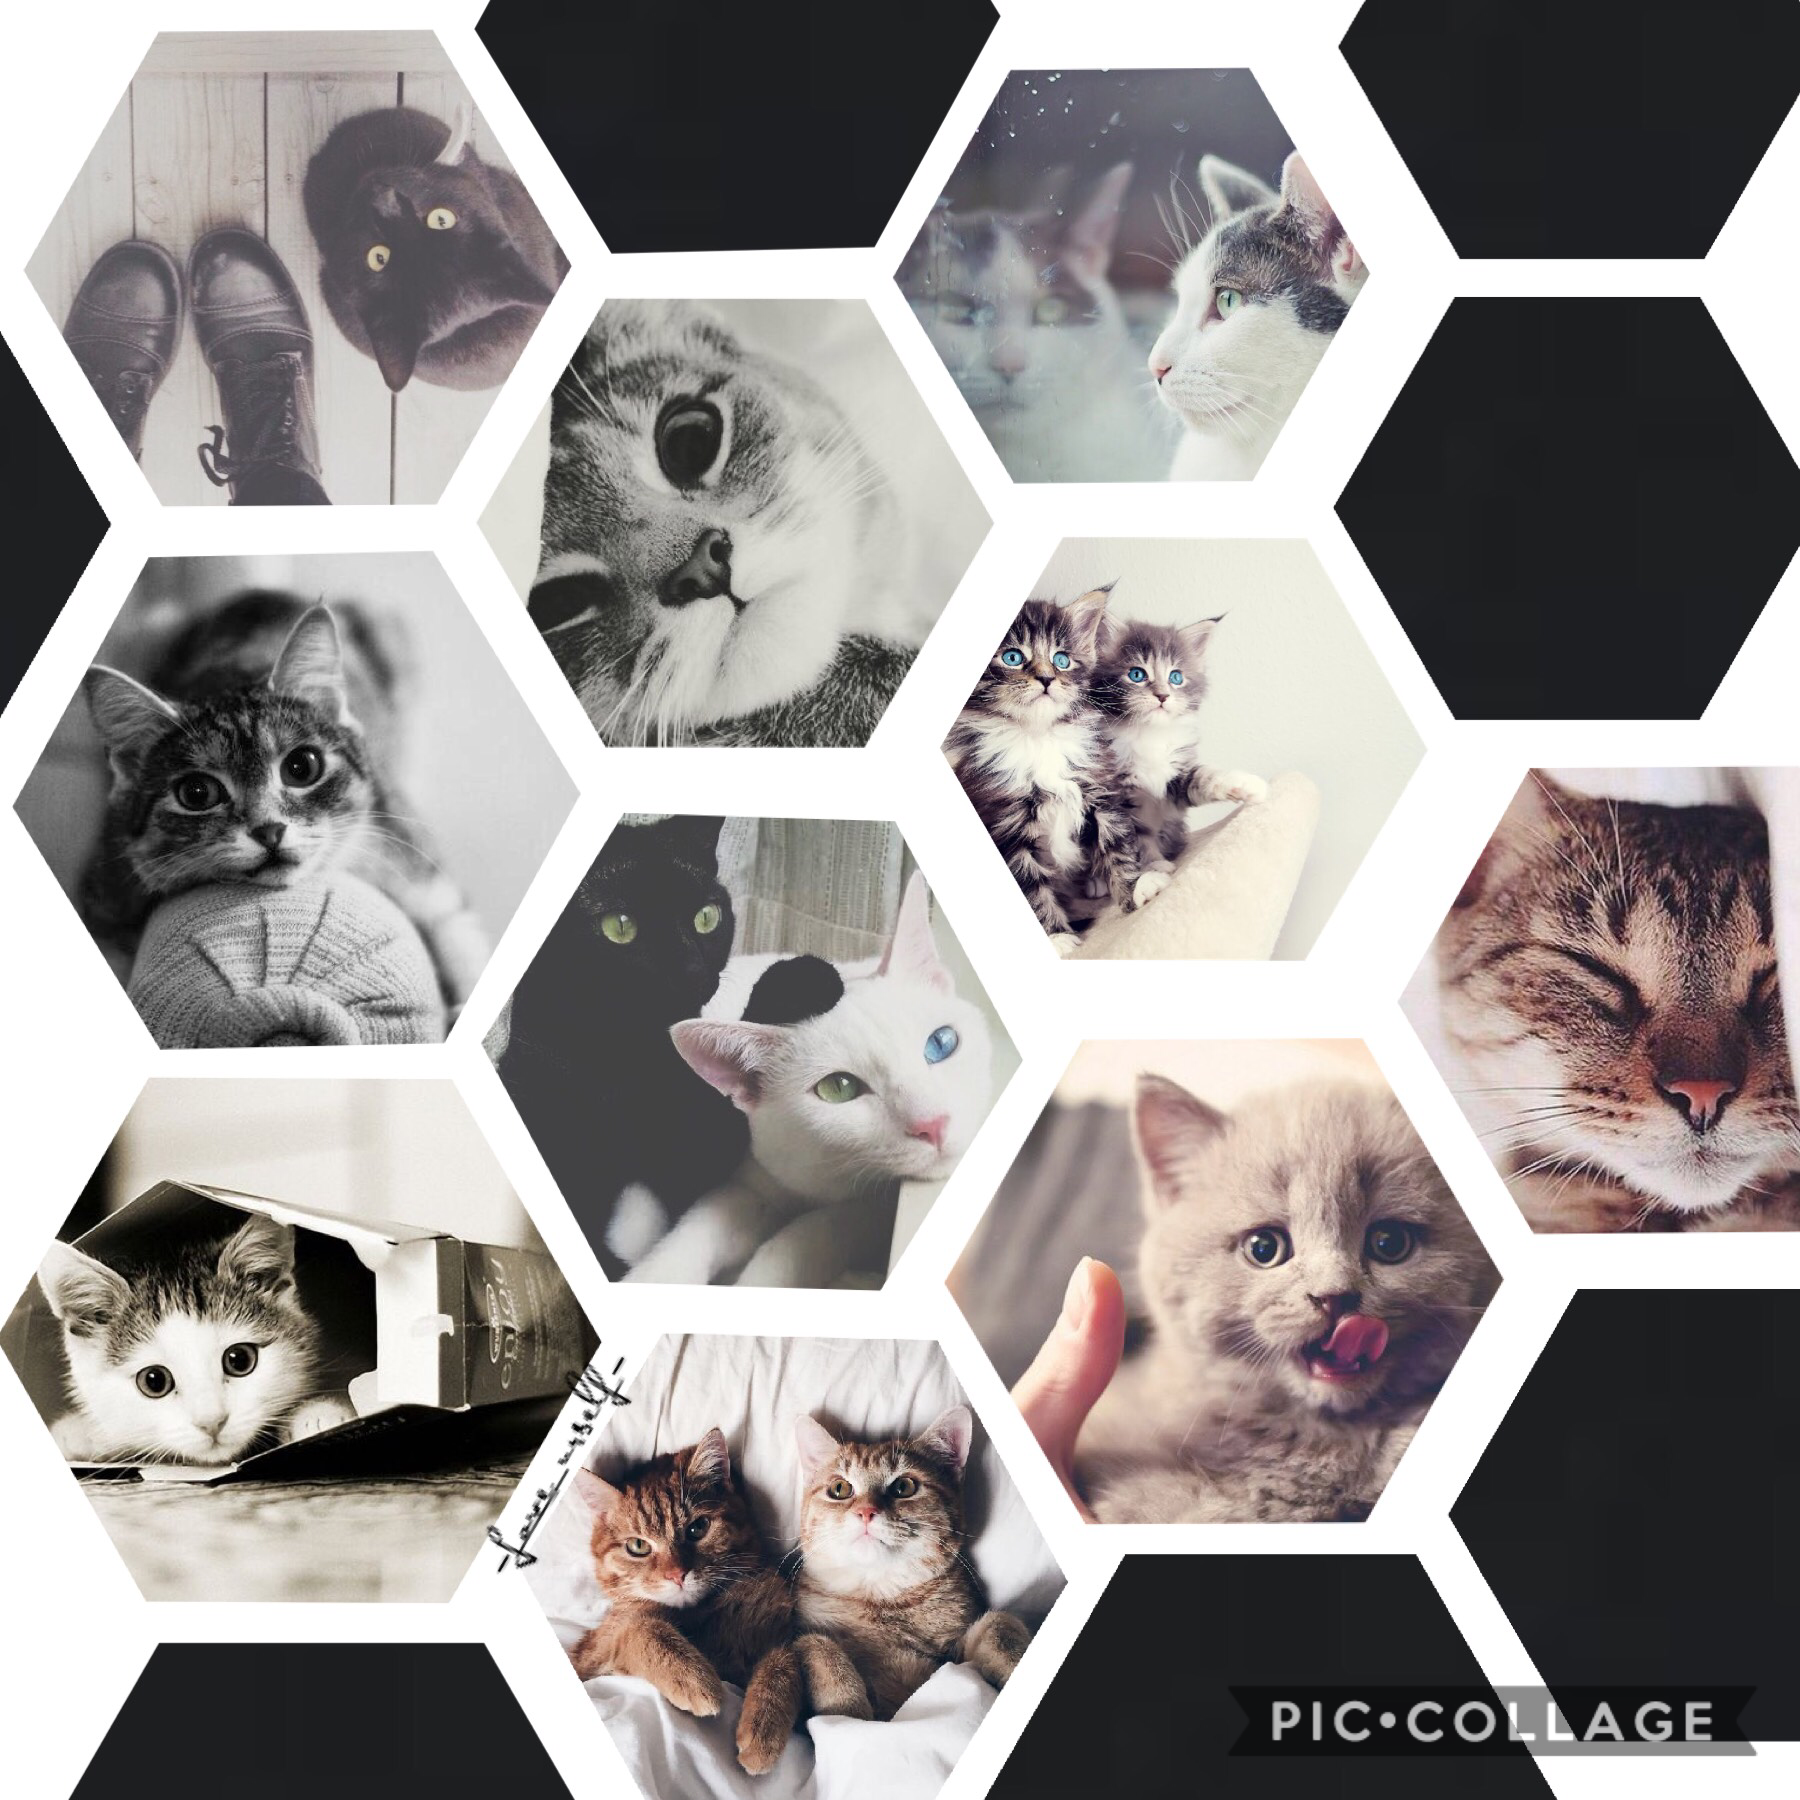 Tap the cat 🐱 
So do u like the theme without words, if u do comment “more no words” and I will do more if multiple people like it!😜🤨